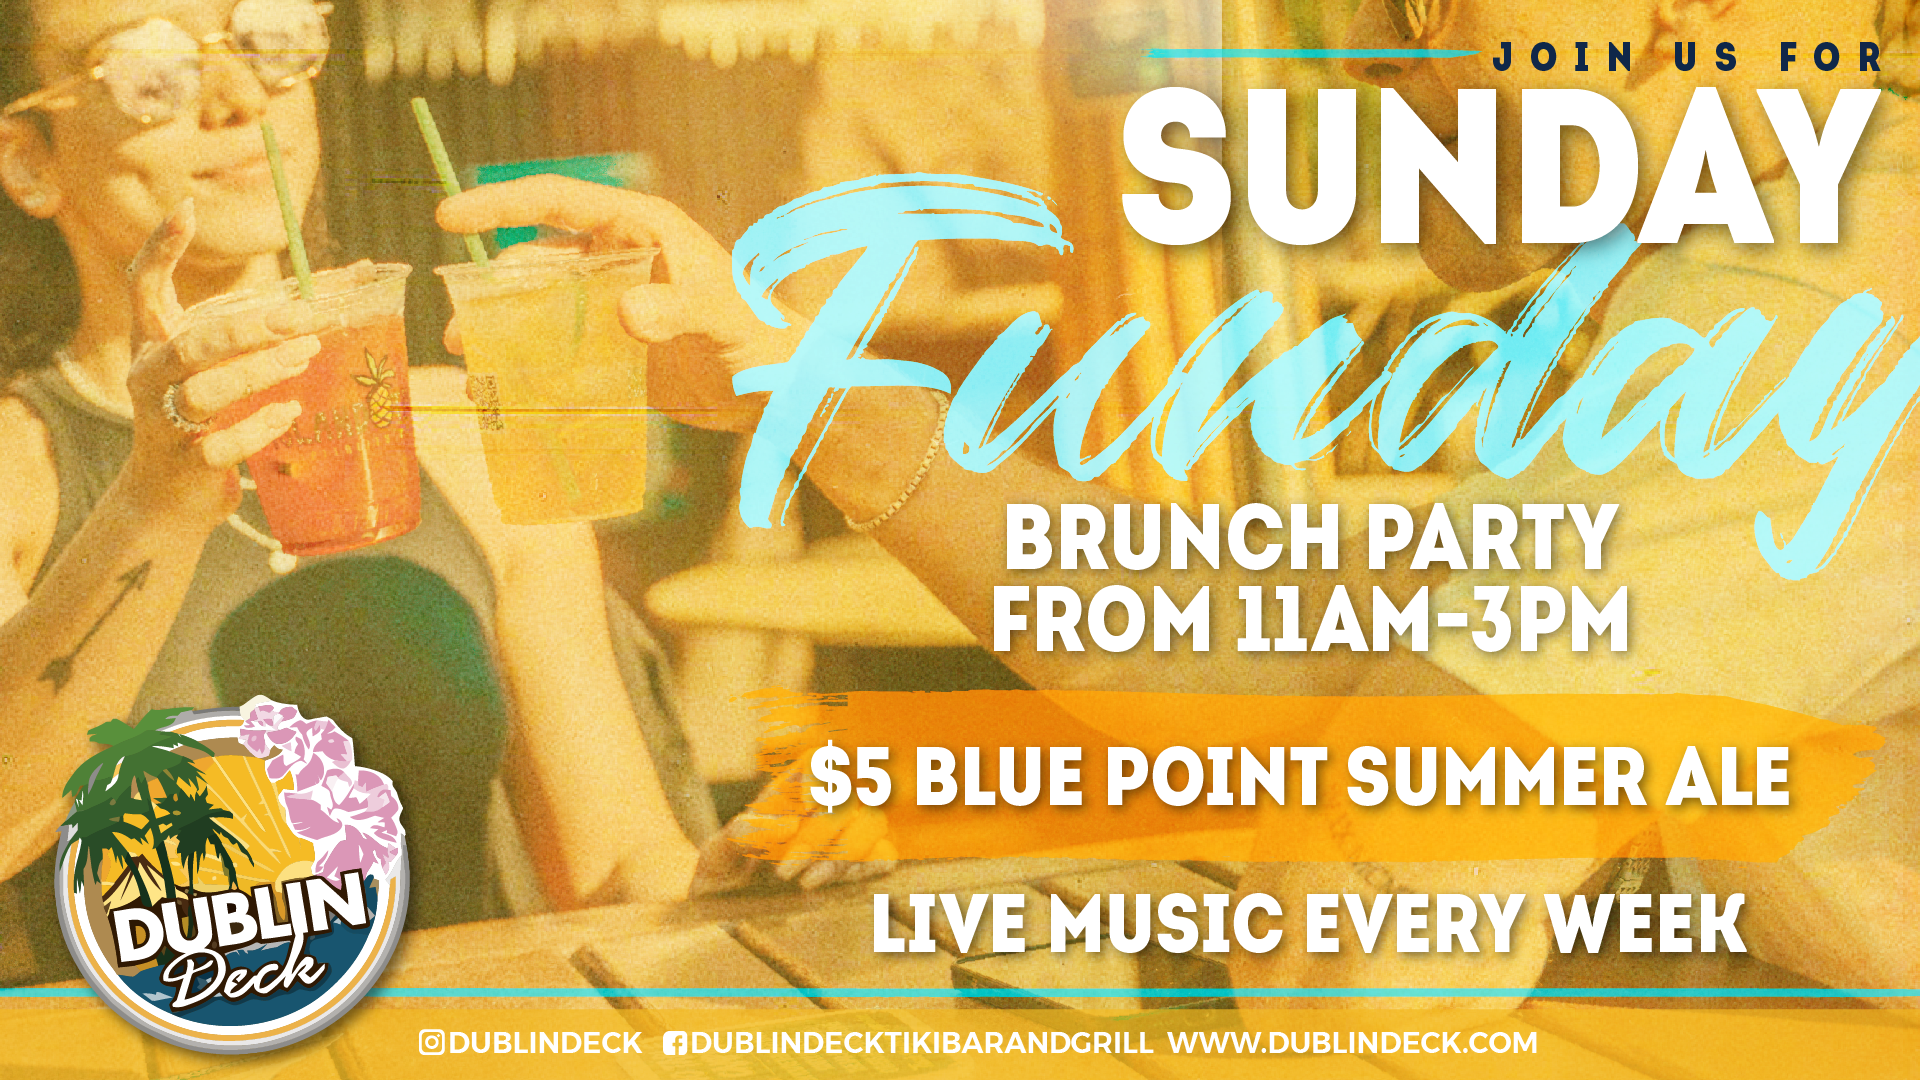 Sunday Funday at the Deck! Brunch Party from 11am-3PM, $5 Blue Point Summer Ales, and live music starting at 4 PM!